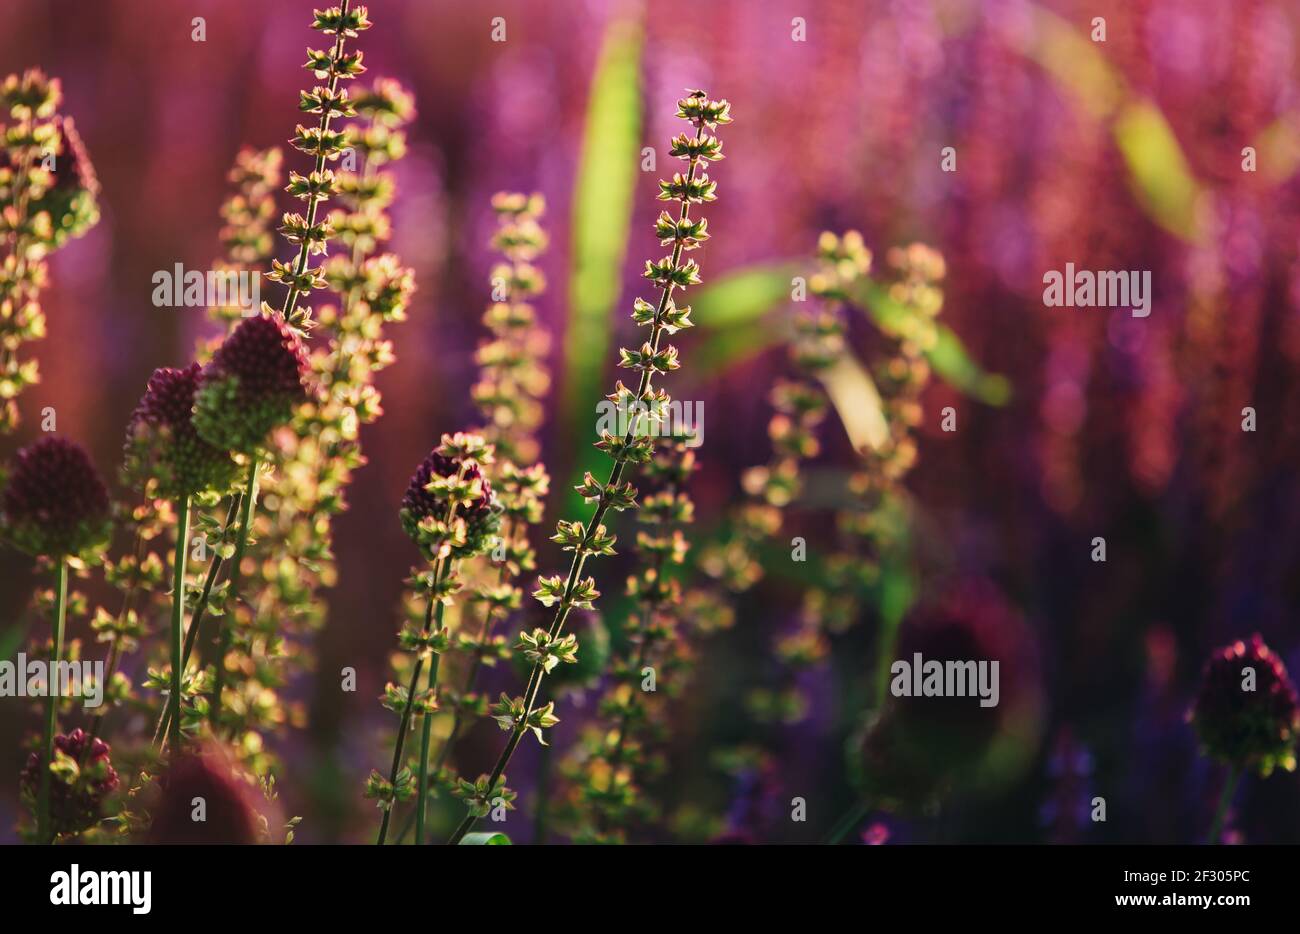 Beautiful exotic green flowers in contre jour light.Rare Persicaria Amplexicaulis flower grow in spring garden.Flower background for decoration Stock Photo